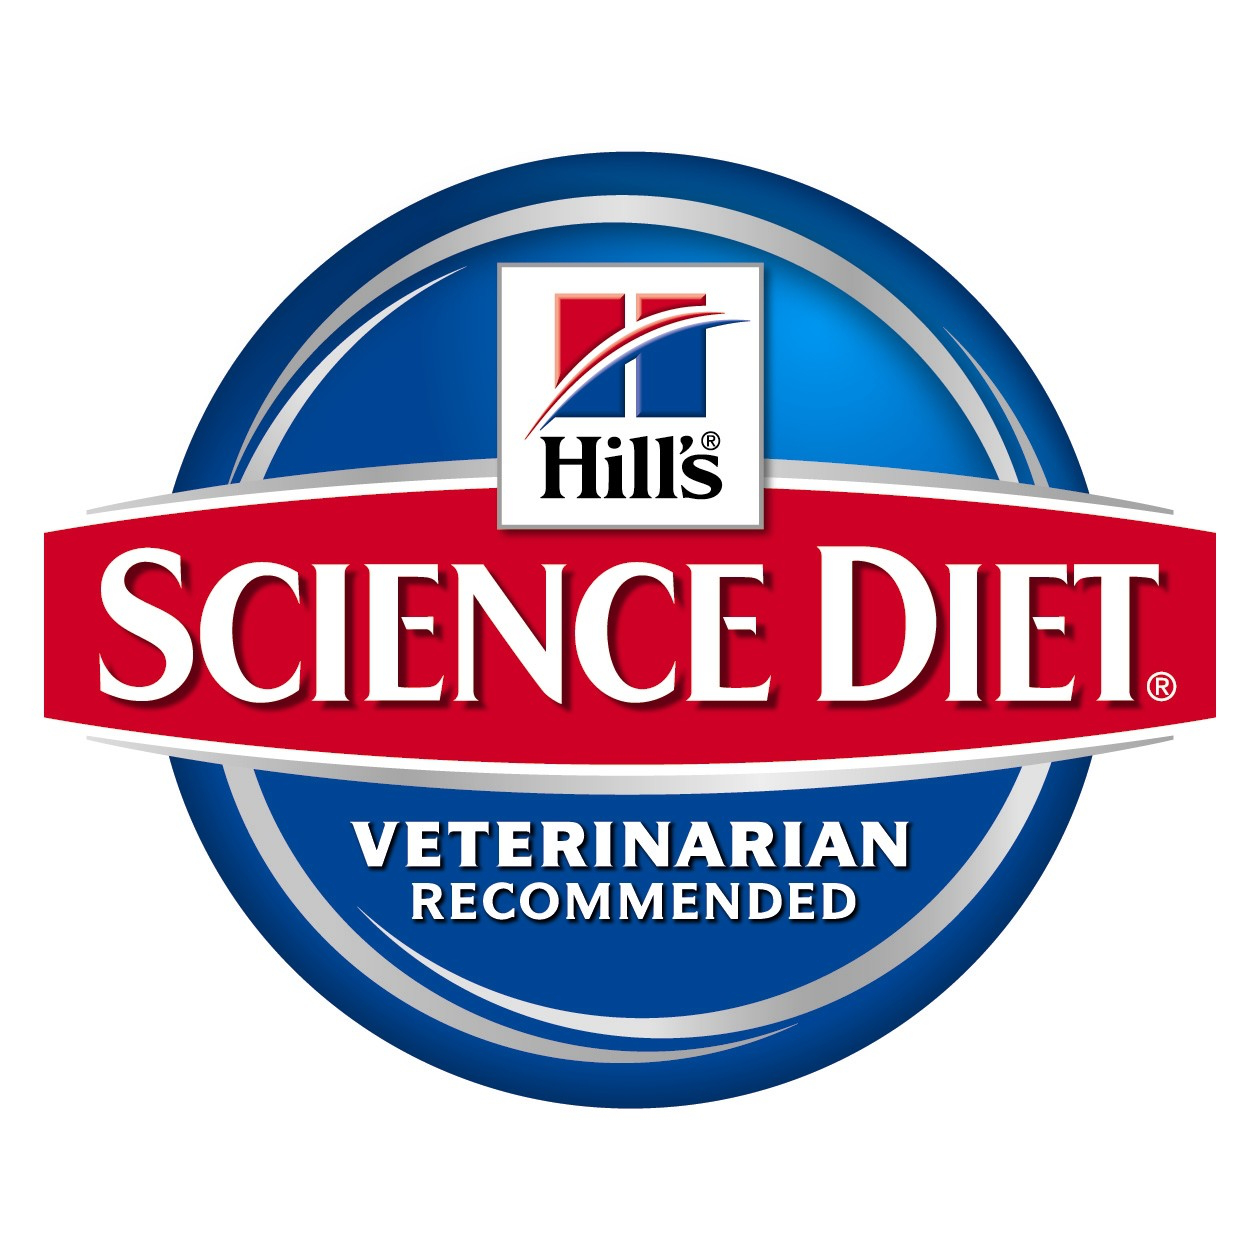 Hill's Science Diet Cat Food Reviews